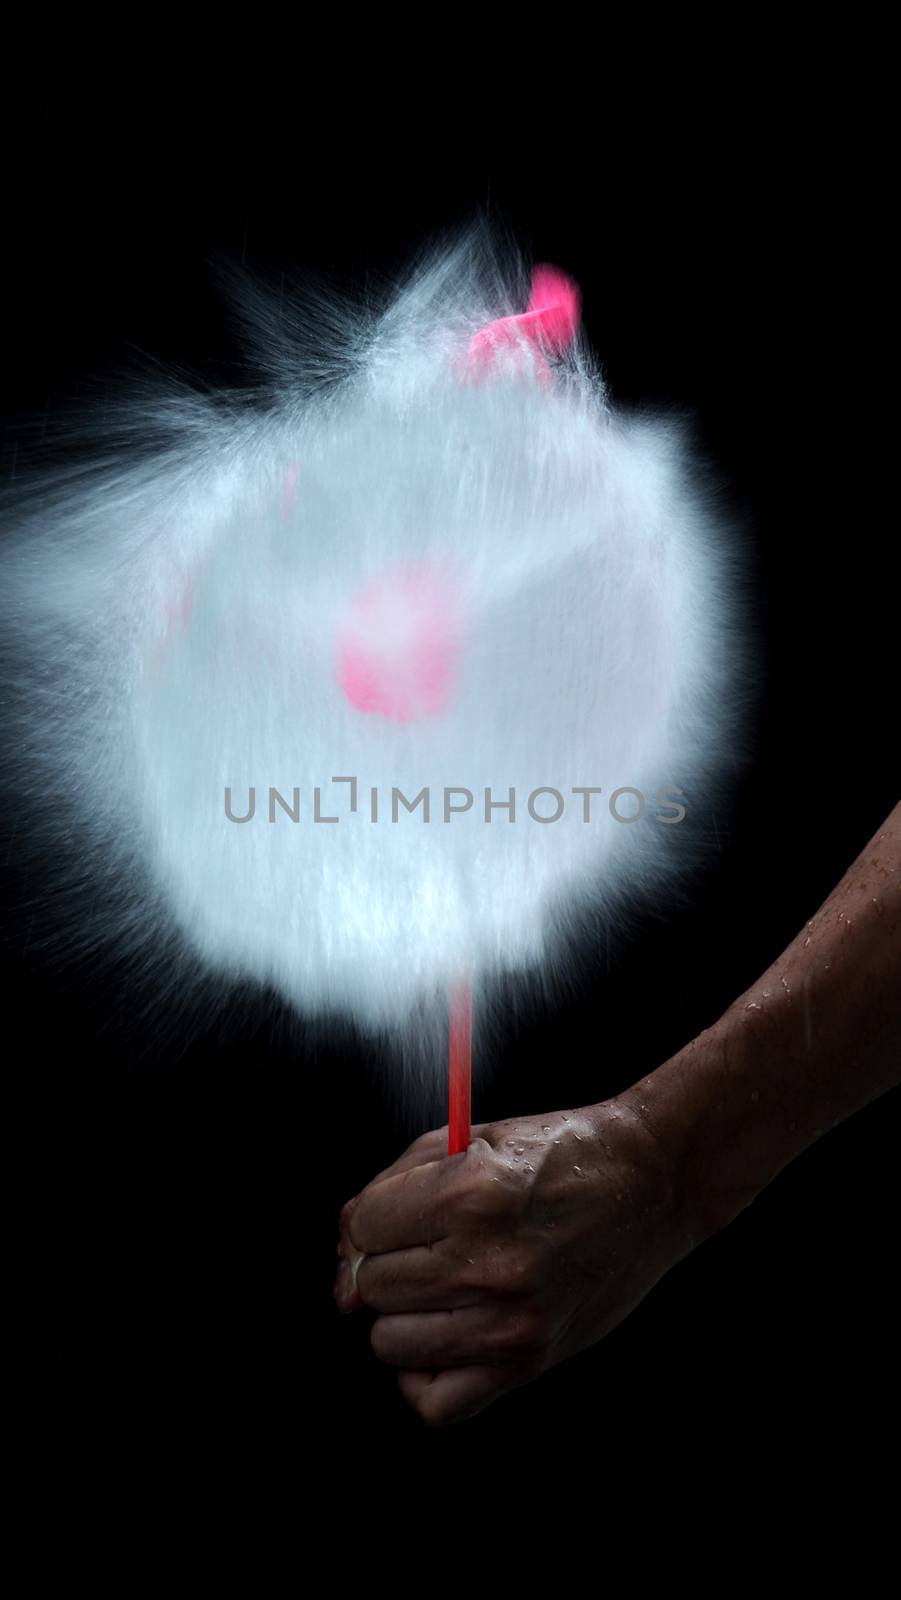 Water balloon exploding or splashing  by gnepphoto